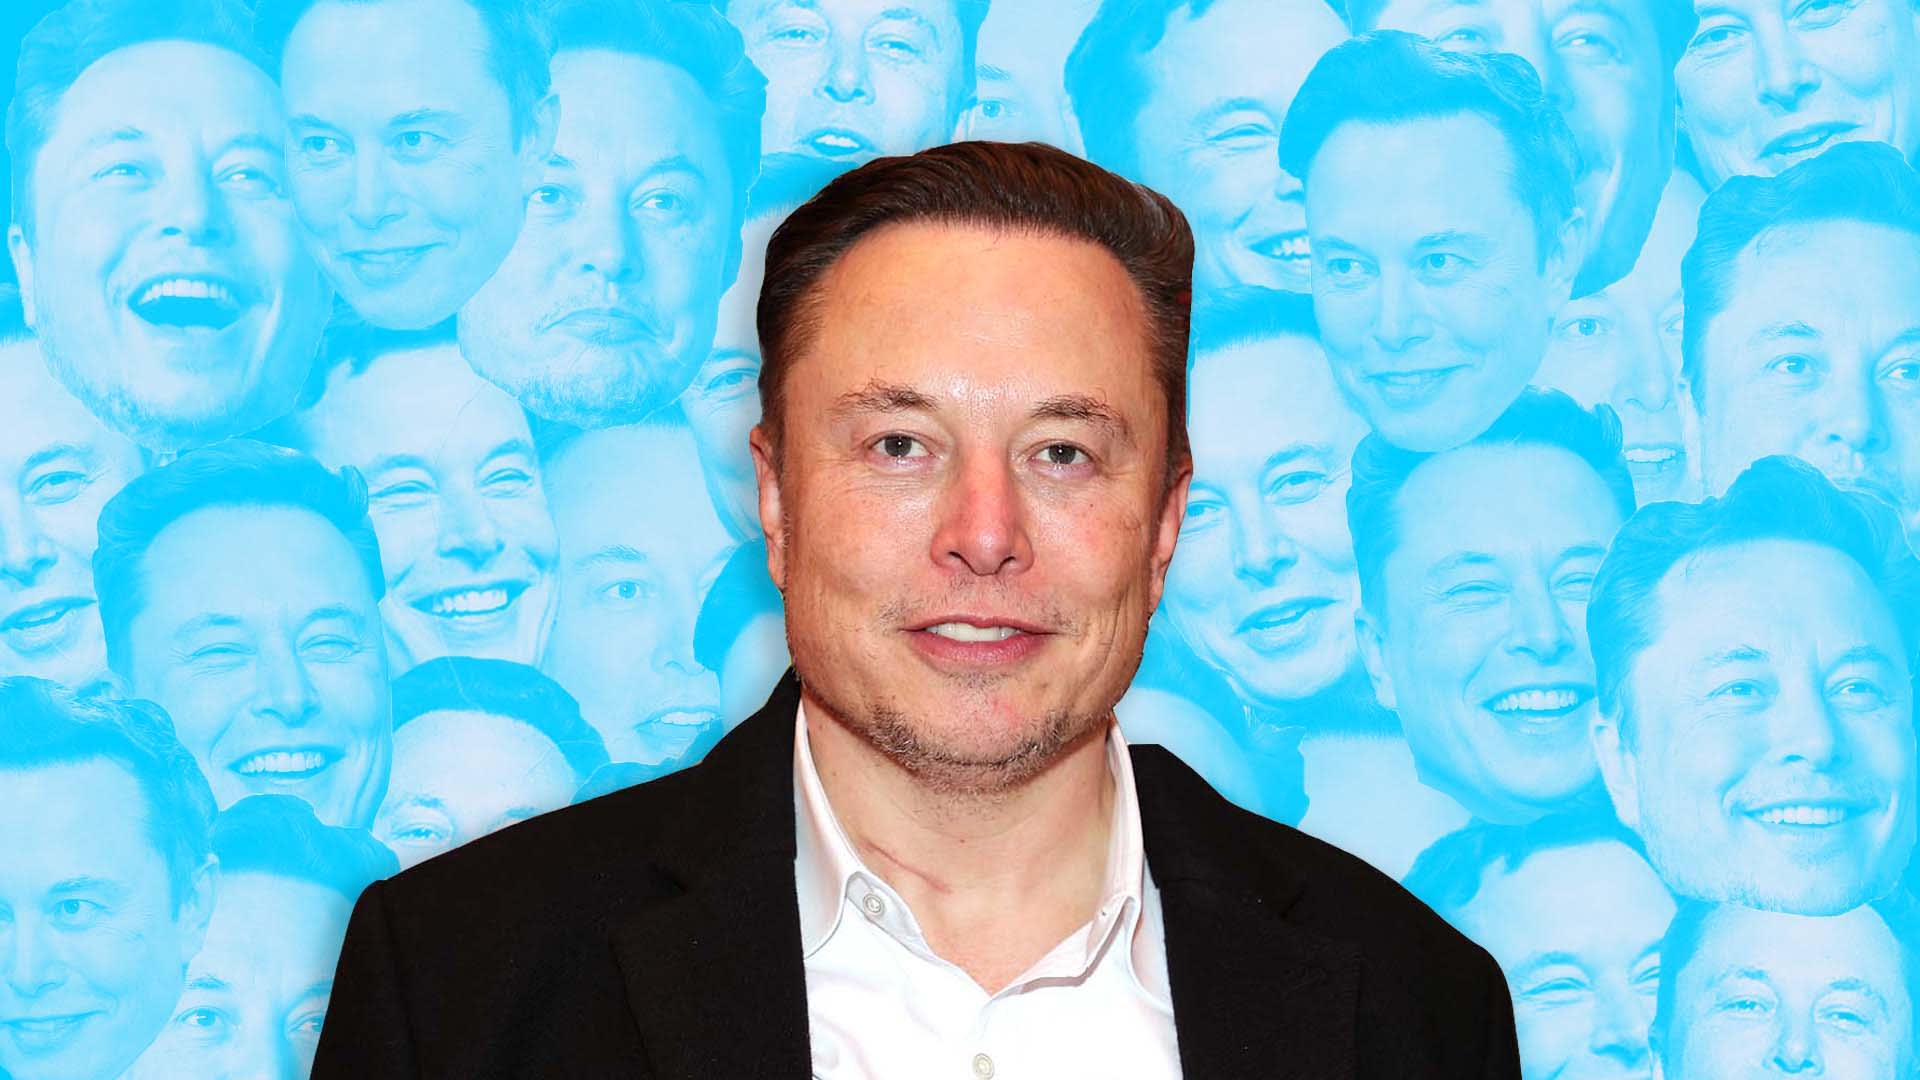 51 Elon Musk Quotes Ranked in Order of Pure Elon Muskiness